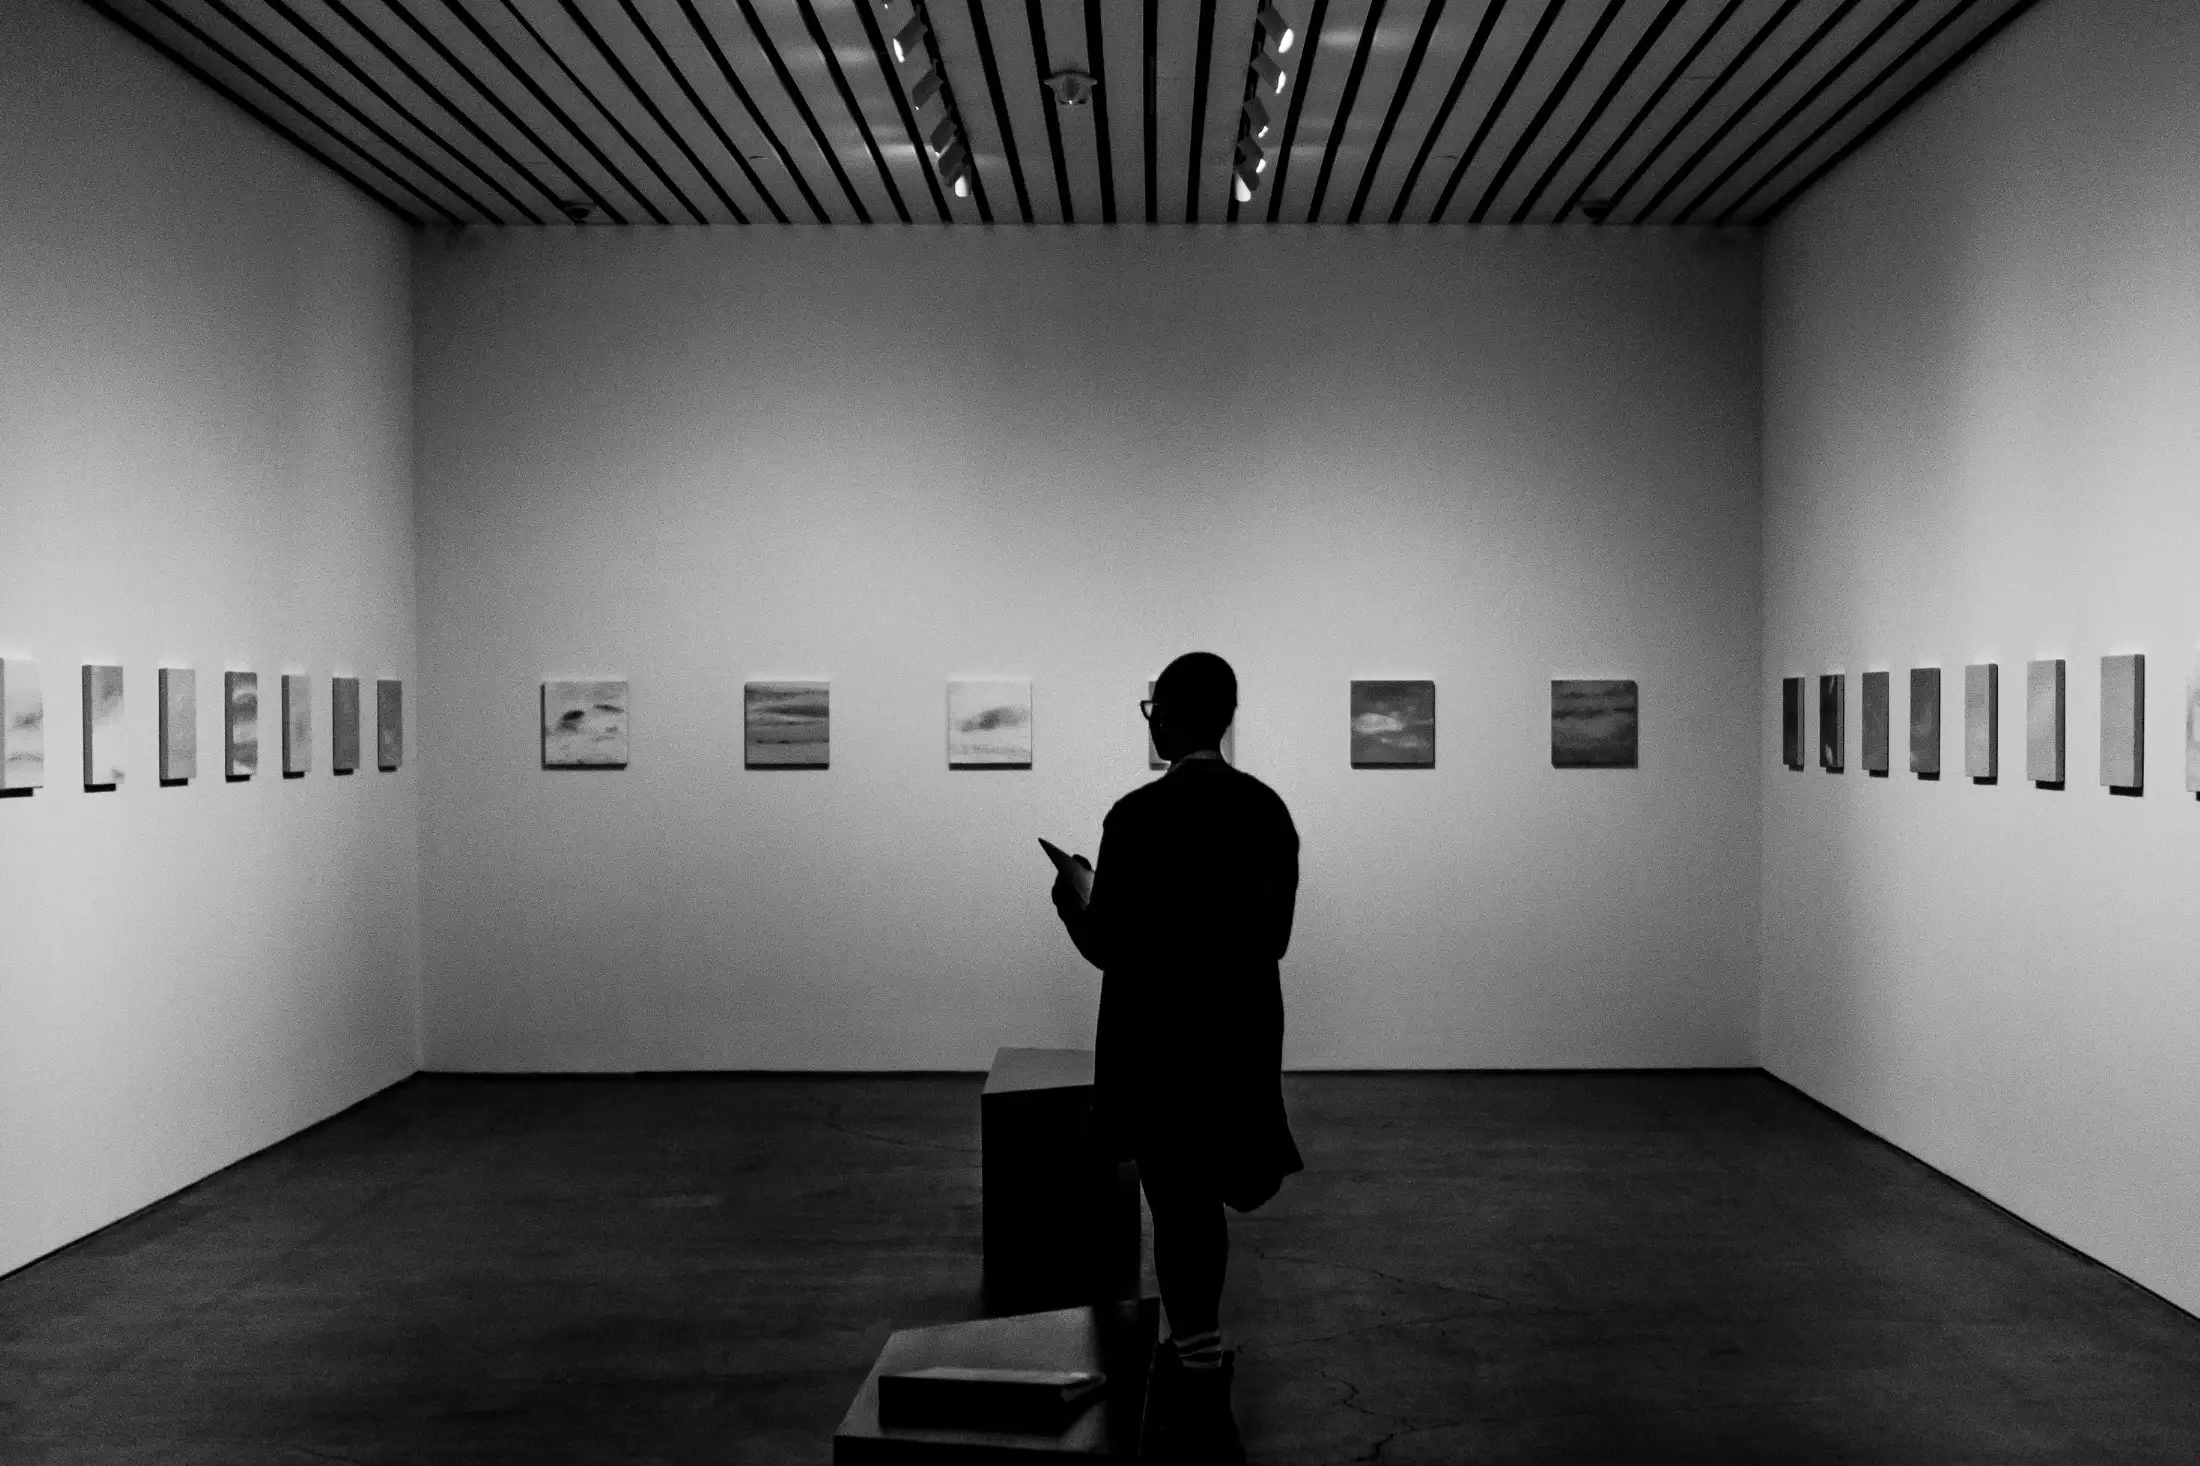 A photograph exhibition in black and white